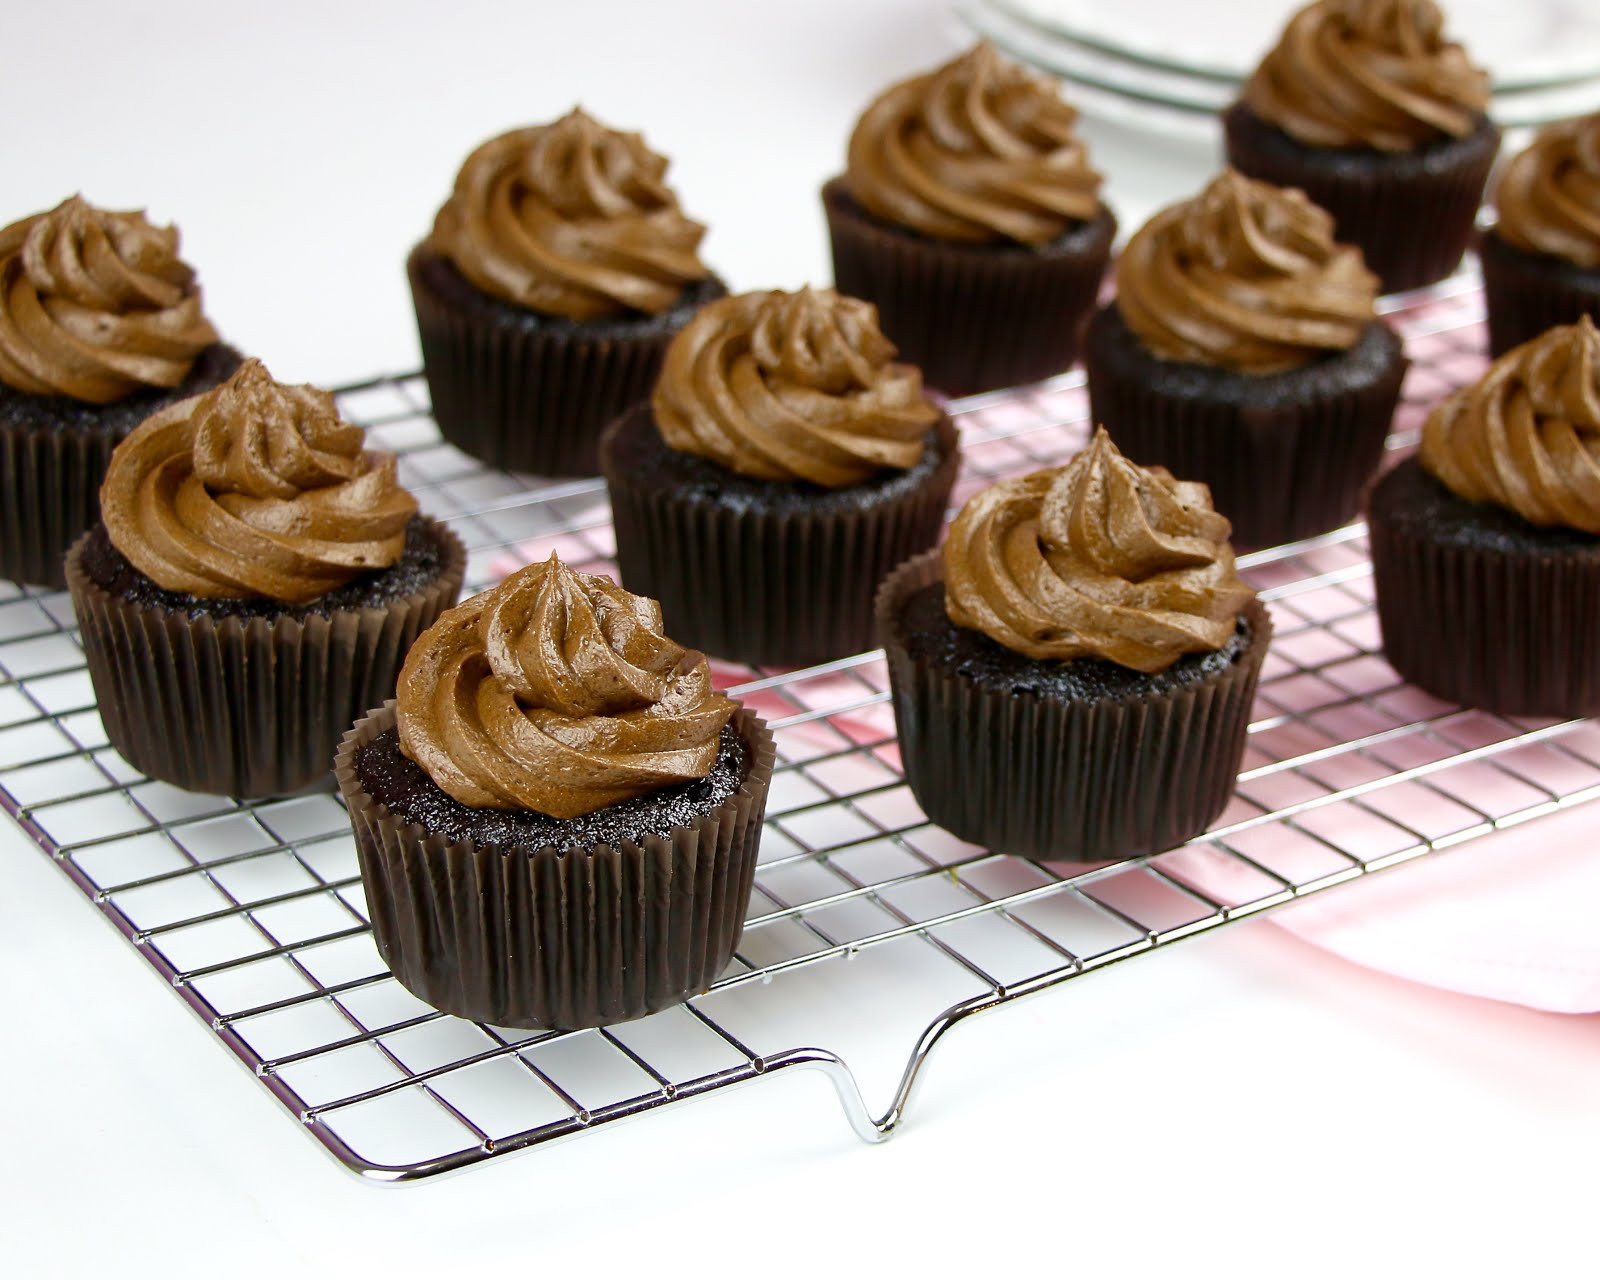 Gourmet Cupcakes Recipes
 VIDEO THE BEST Chocolate Cupcakes from Scratch The